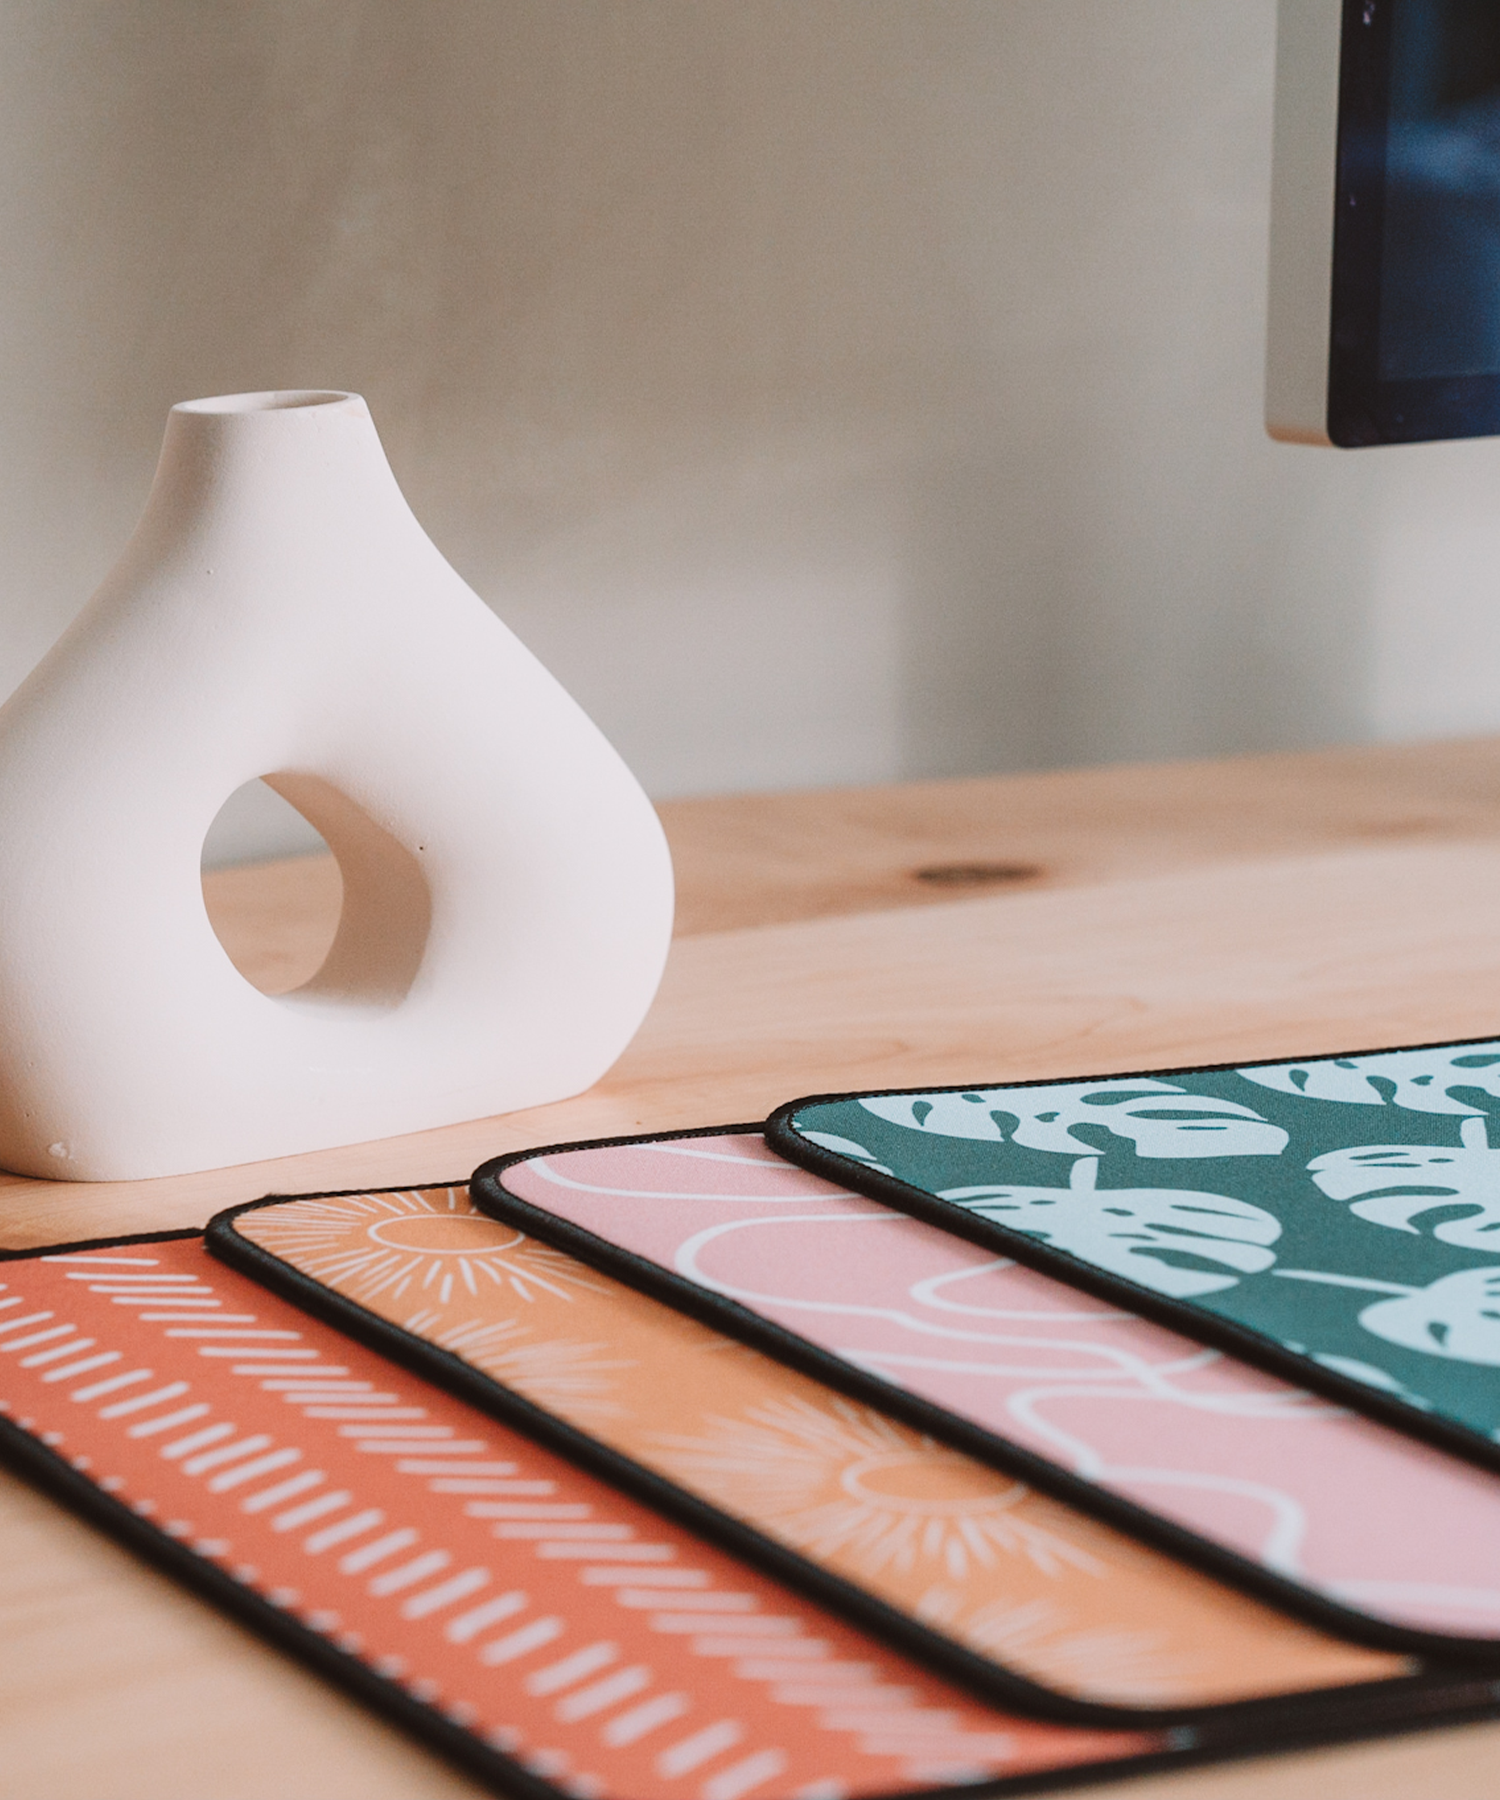 All mousepads are stacked laying on a desk with an asymmetrical vase in the background